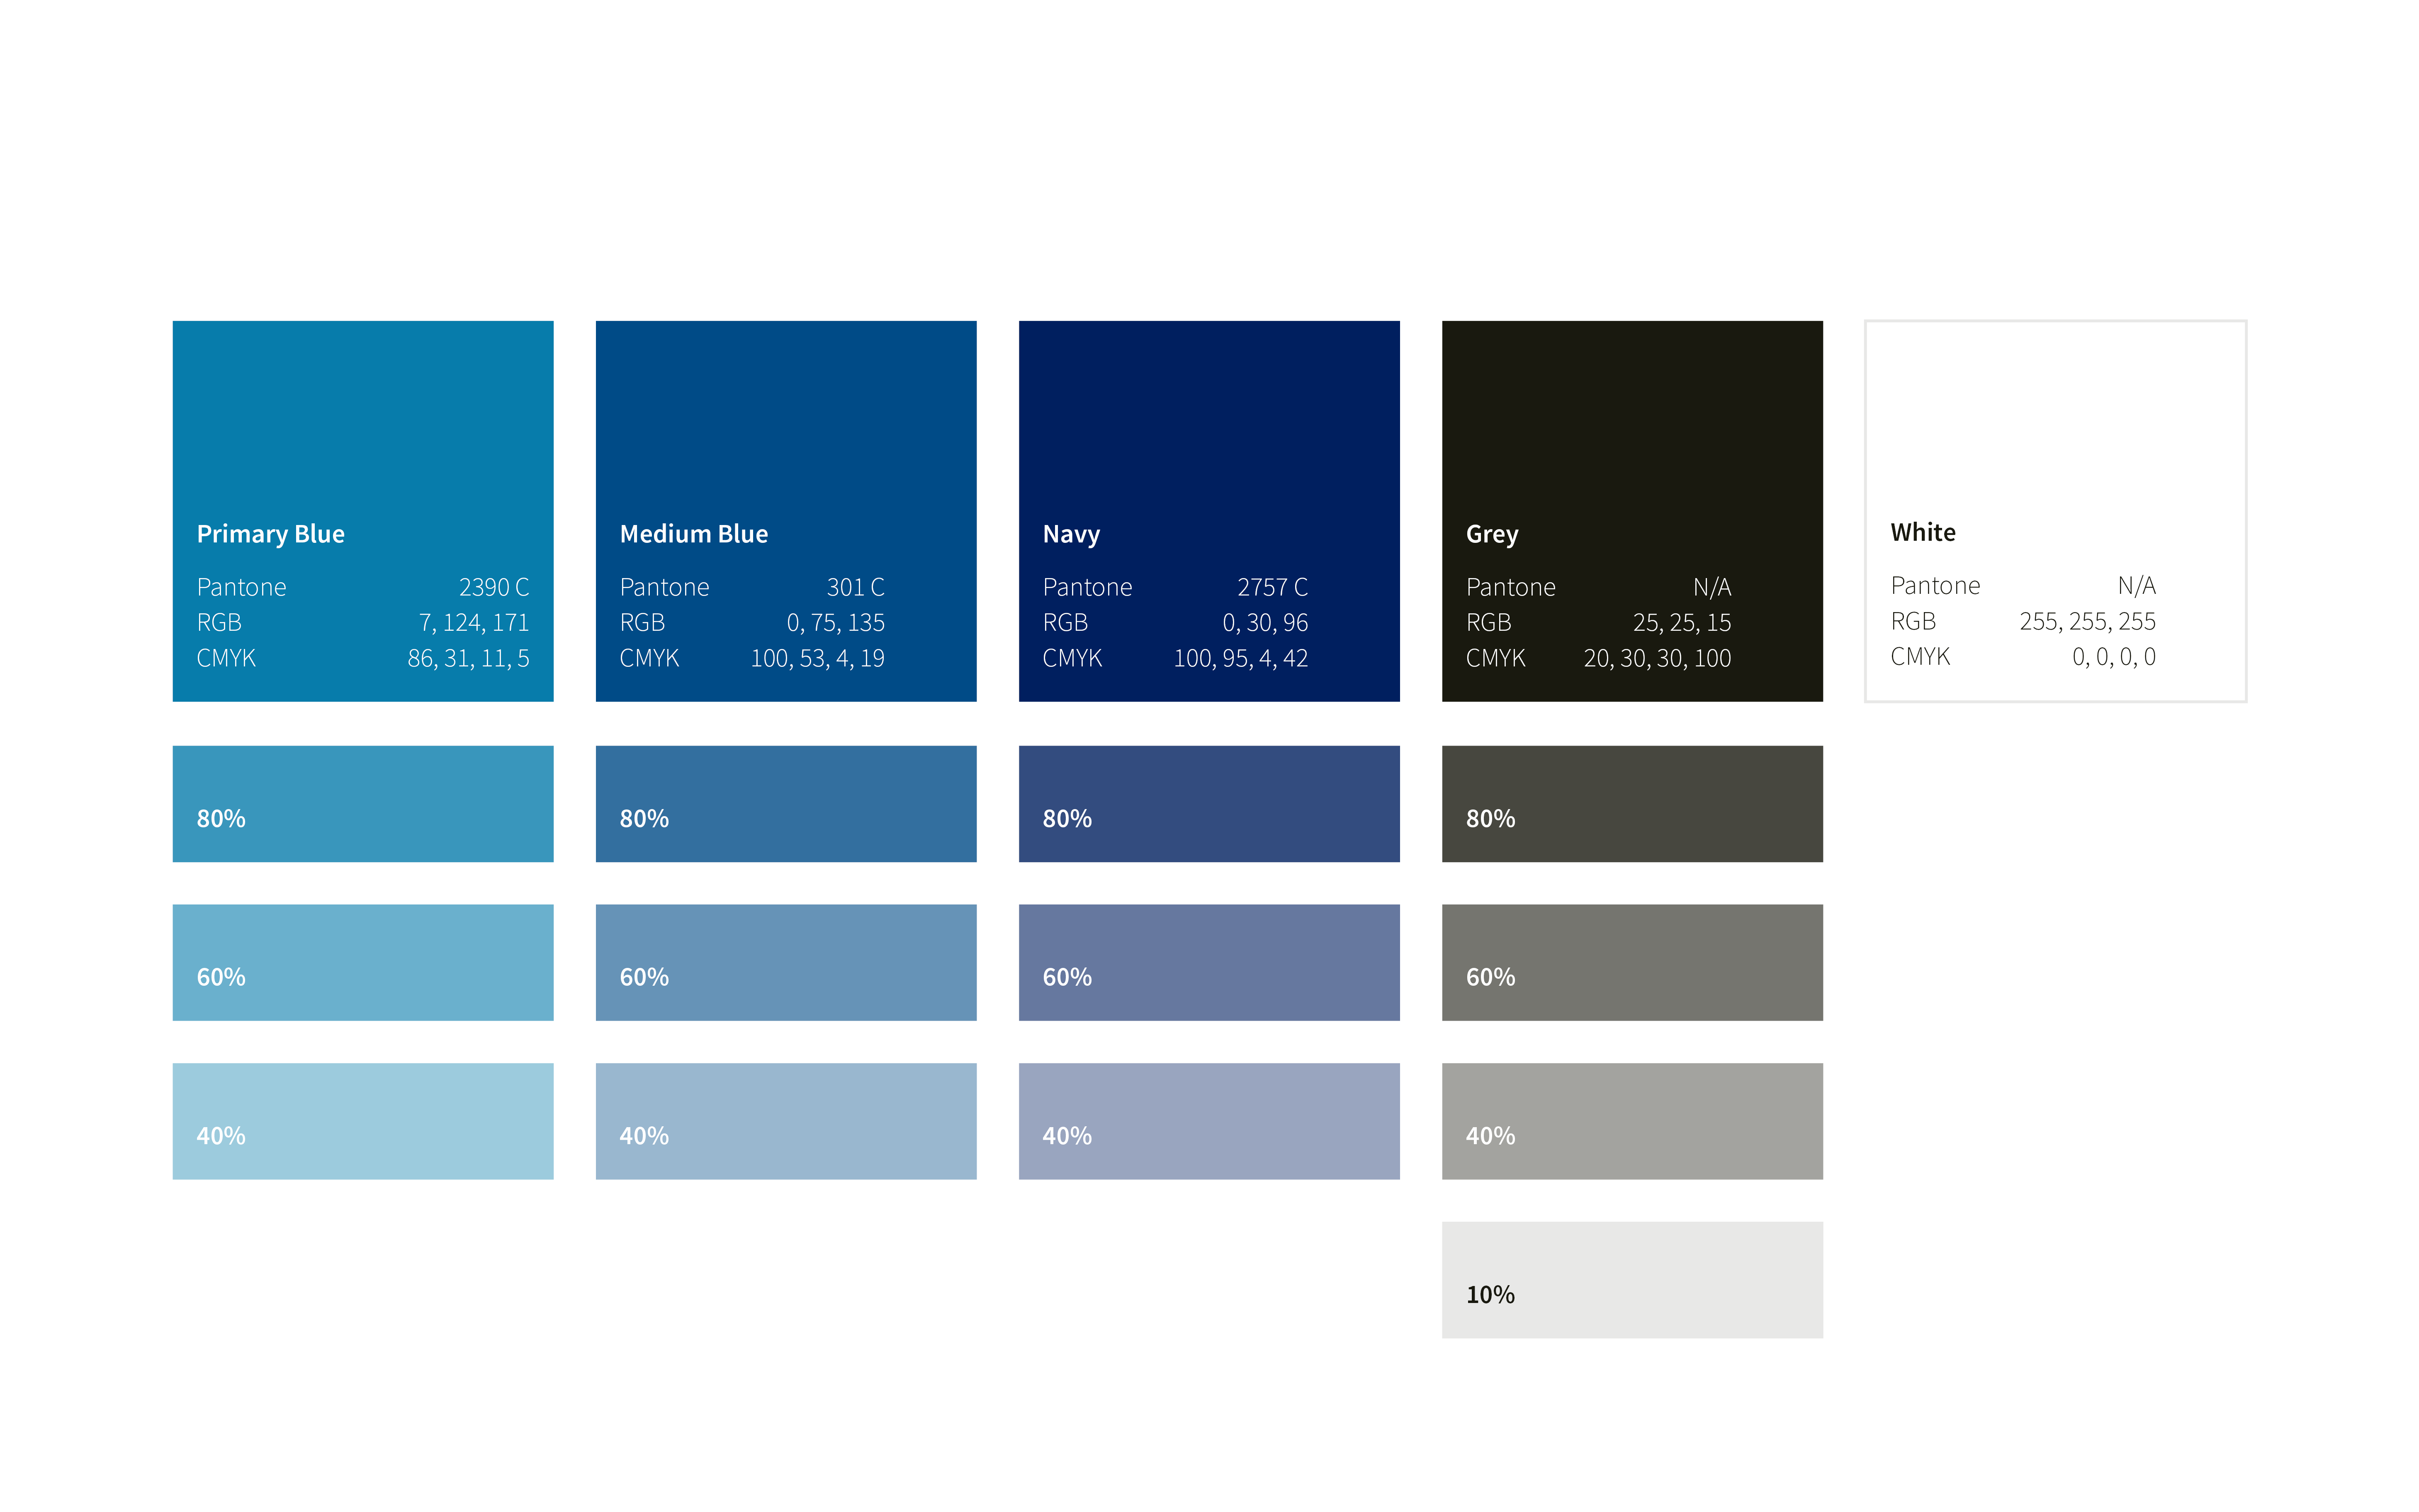 The Trinity Mobile Networks color palette of blues and grays